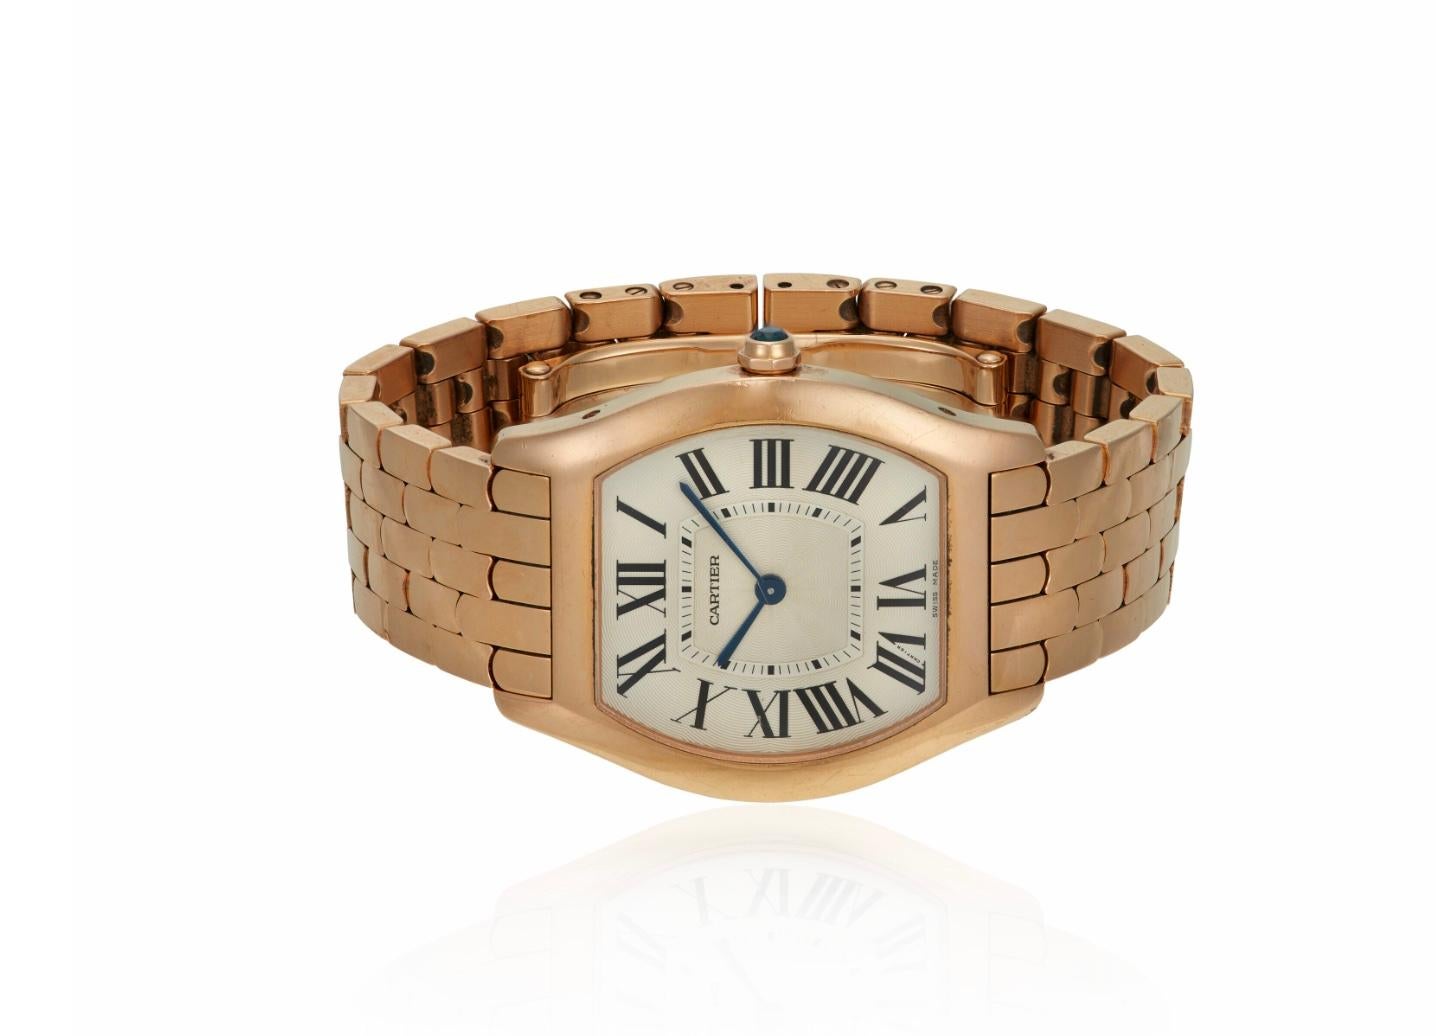 Pre-owned Cartier Tortue ladies wrist-watch in 18kt rose gold. Chic and slim 8.6mm thick case with integral link bracelet and hidden fold-over clasp. Tonneau-shaped 31mm dial with roman numeral hour markers and finely detailed guilloche dial with